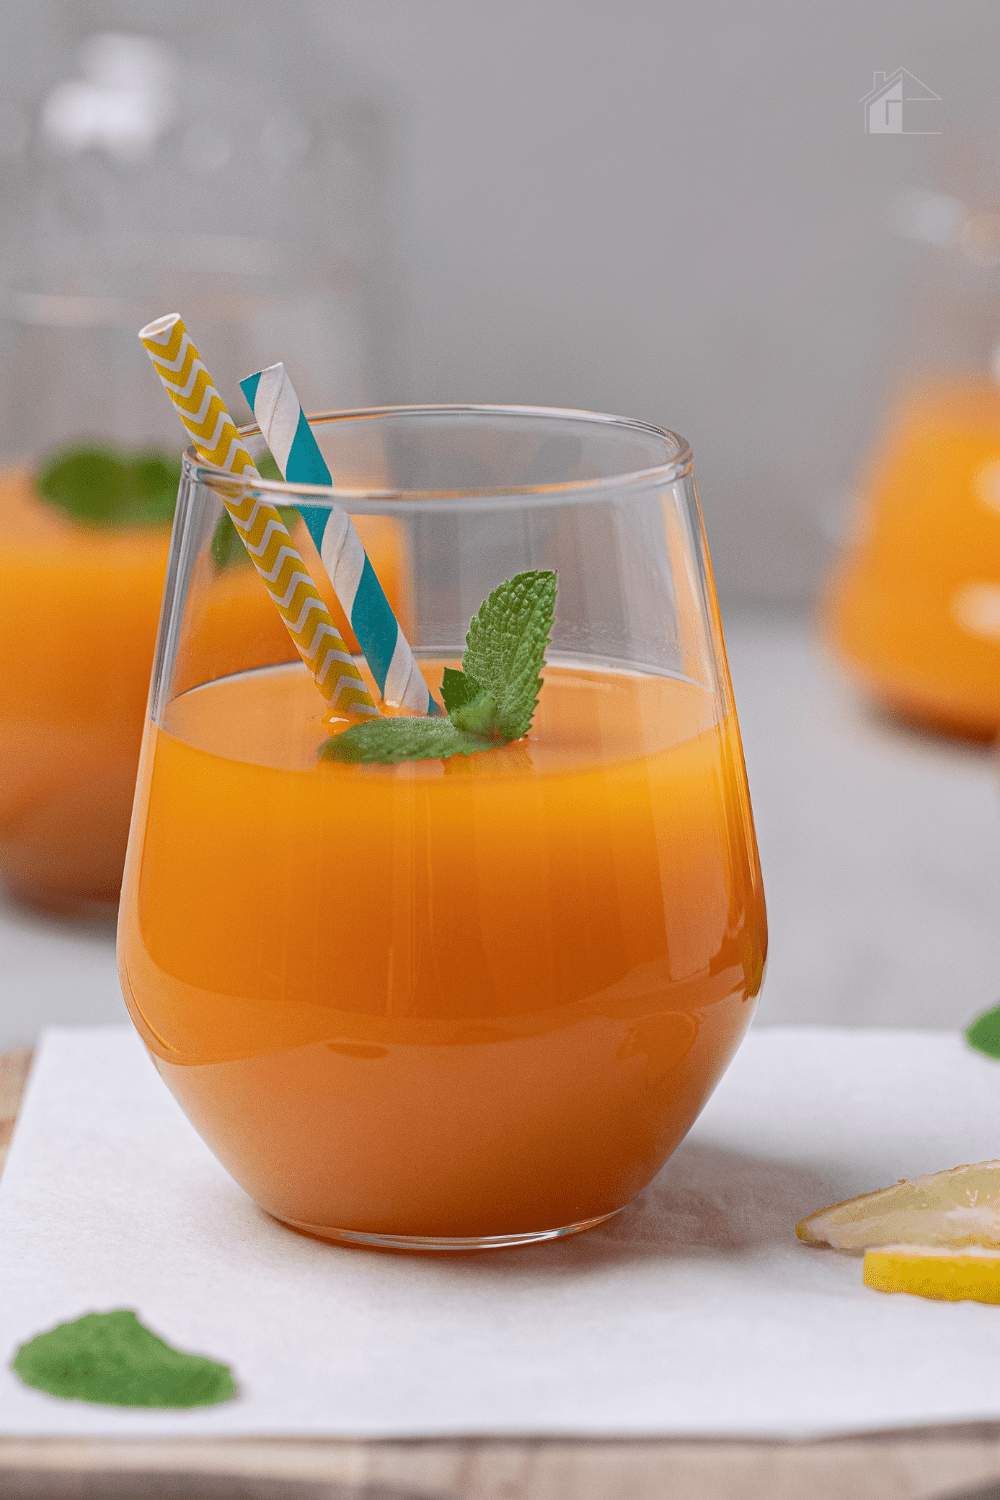 This coconut water-based tropical juice is both delicious and energizing!. All you need are some fresh fruit and a juicer. #juicerecipe #juicing via @mystayathome